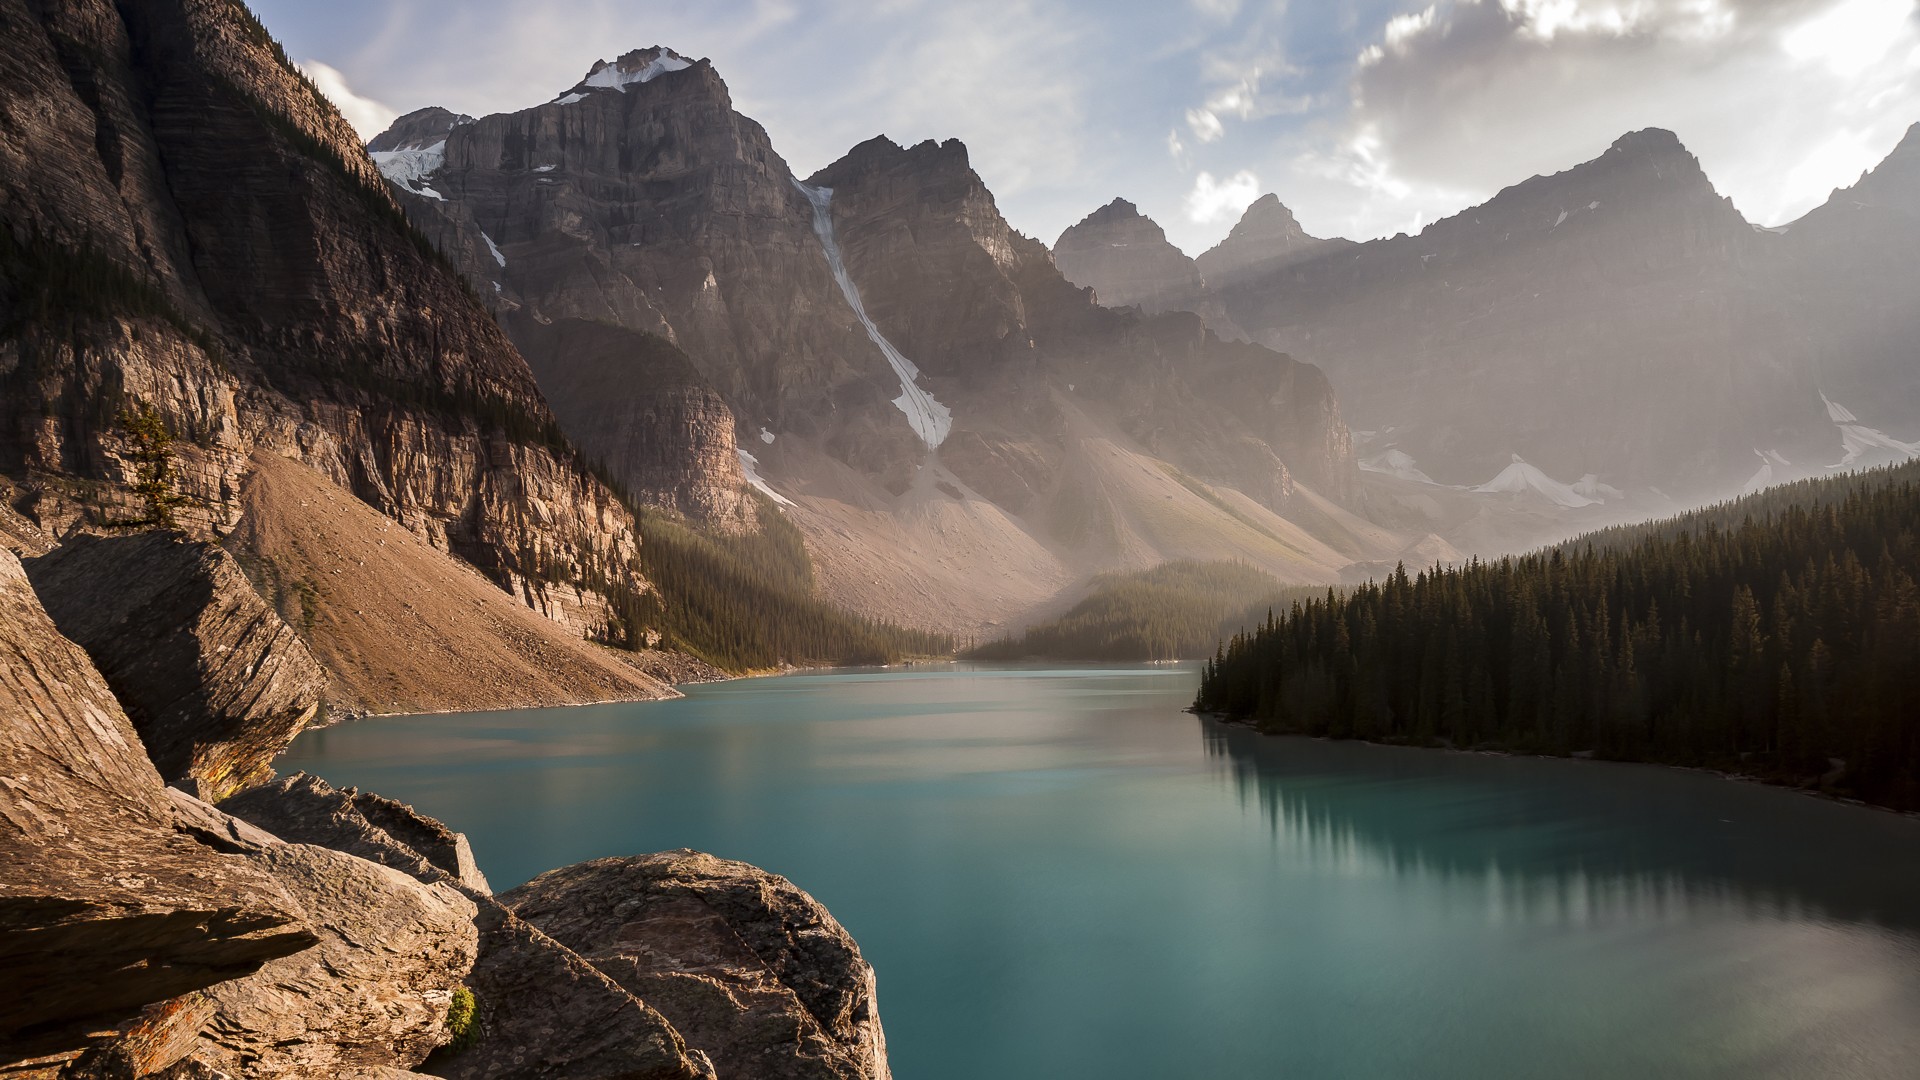 General 1920x1080 nature mountains lake landscape trees forest snow Moraine Lake Canada Banff National Park water reflection sunlight sky clouds